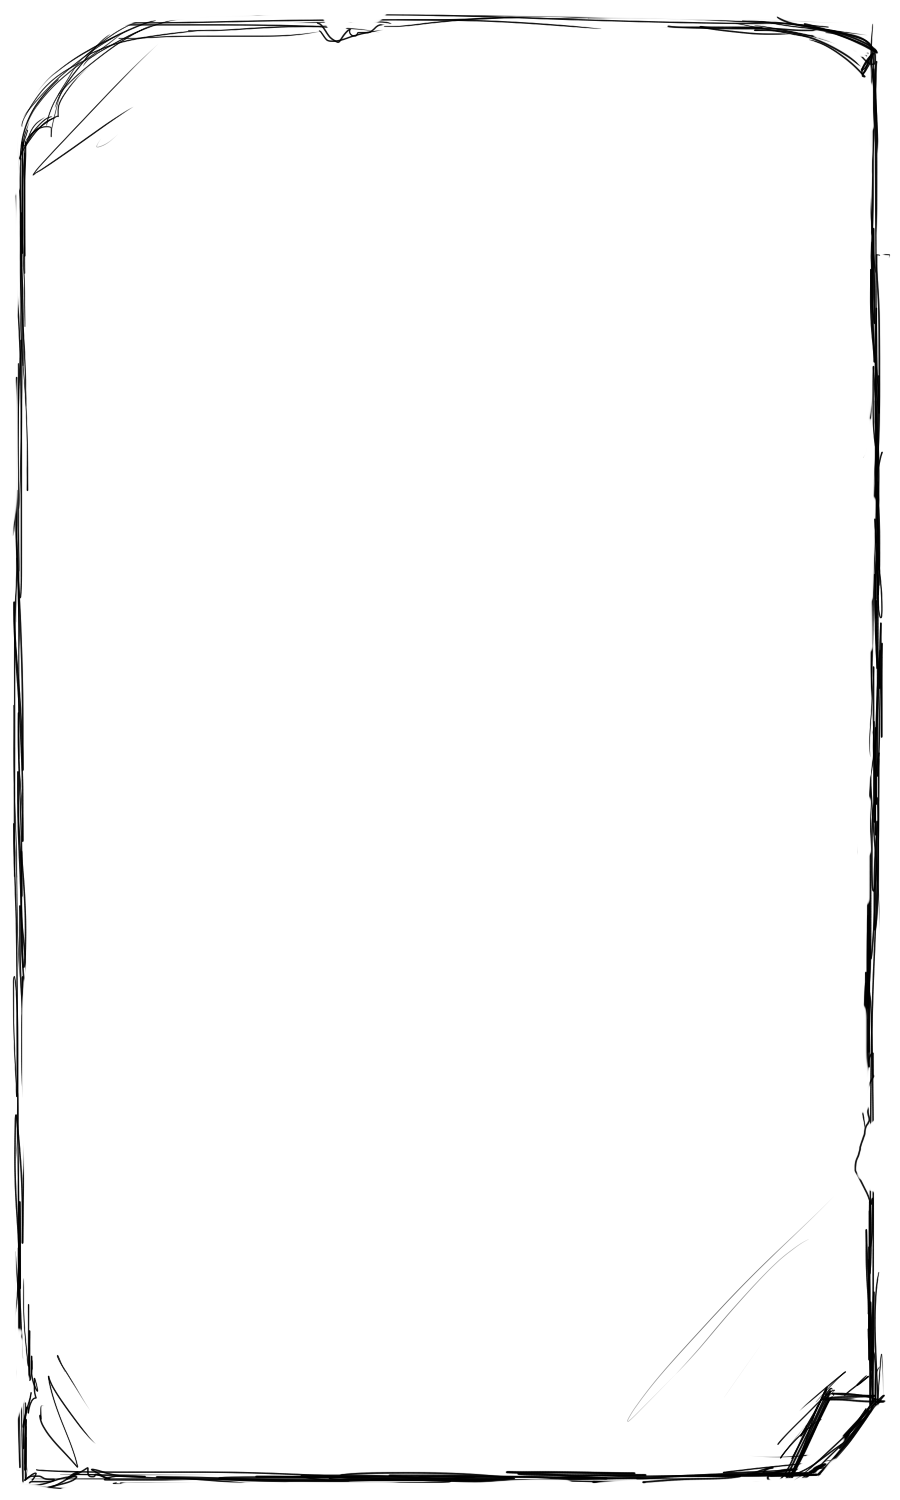 blank-page-template-by-roxify-on-deviantart